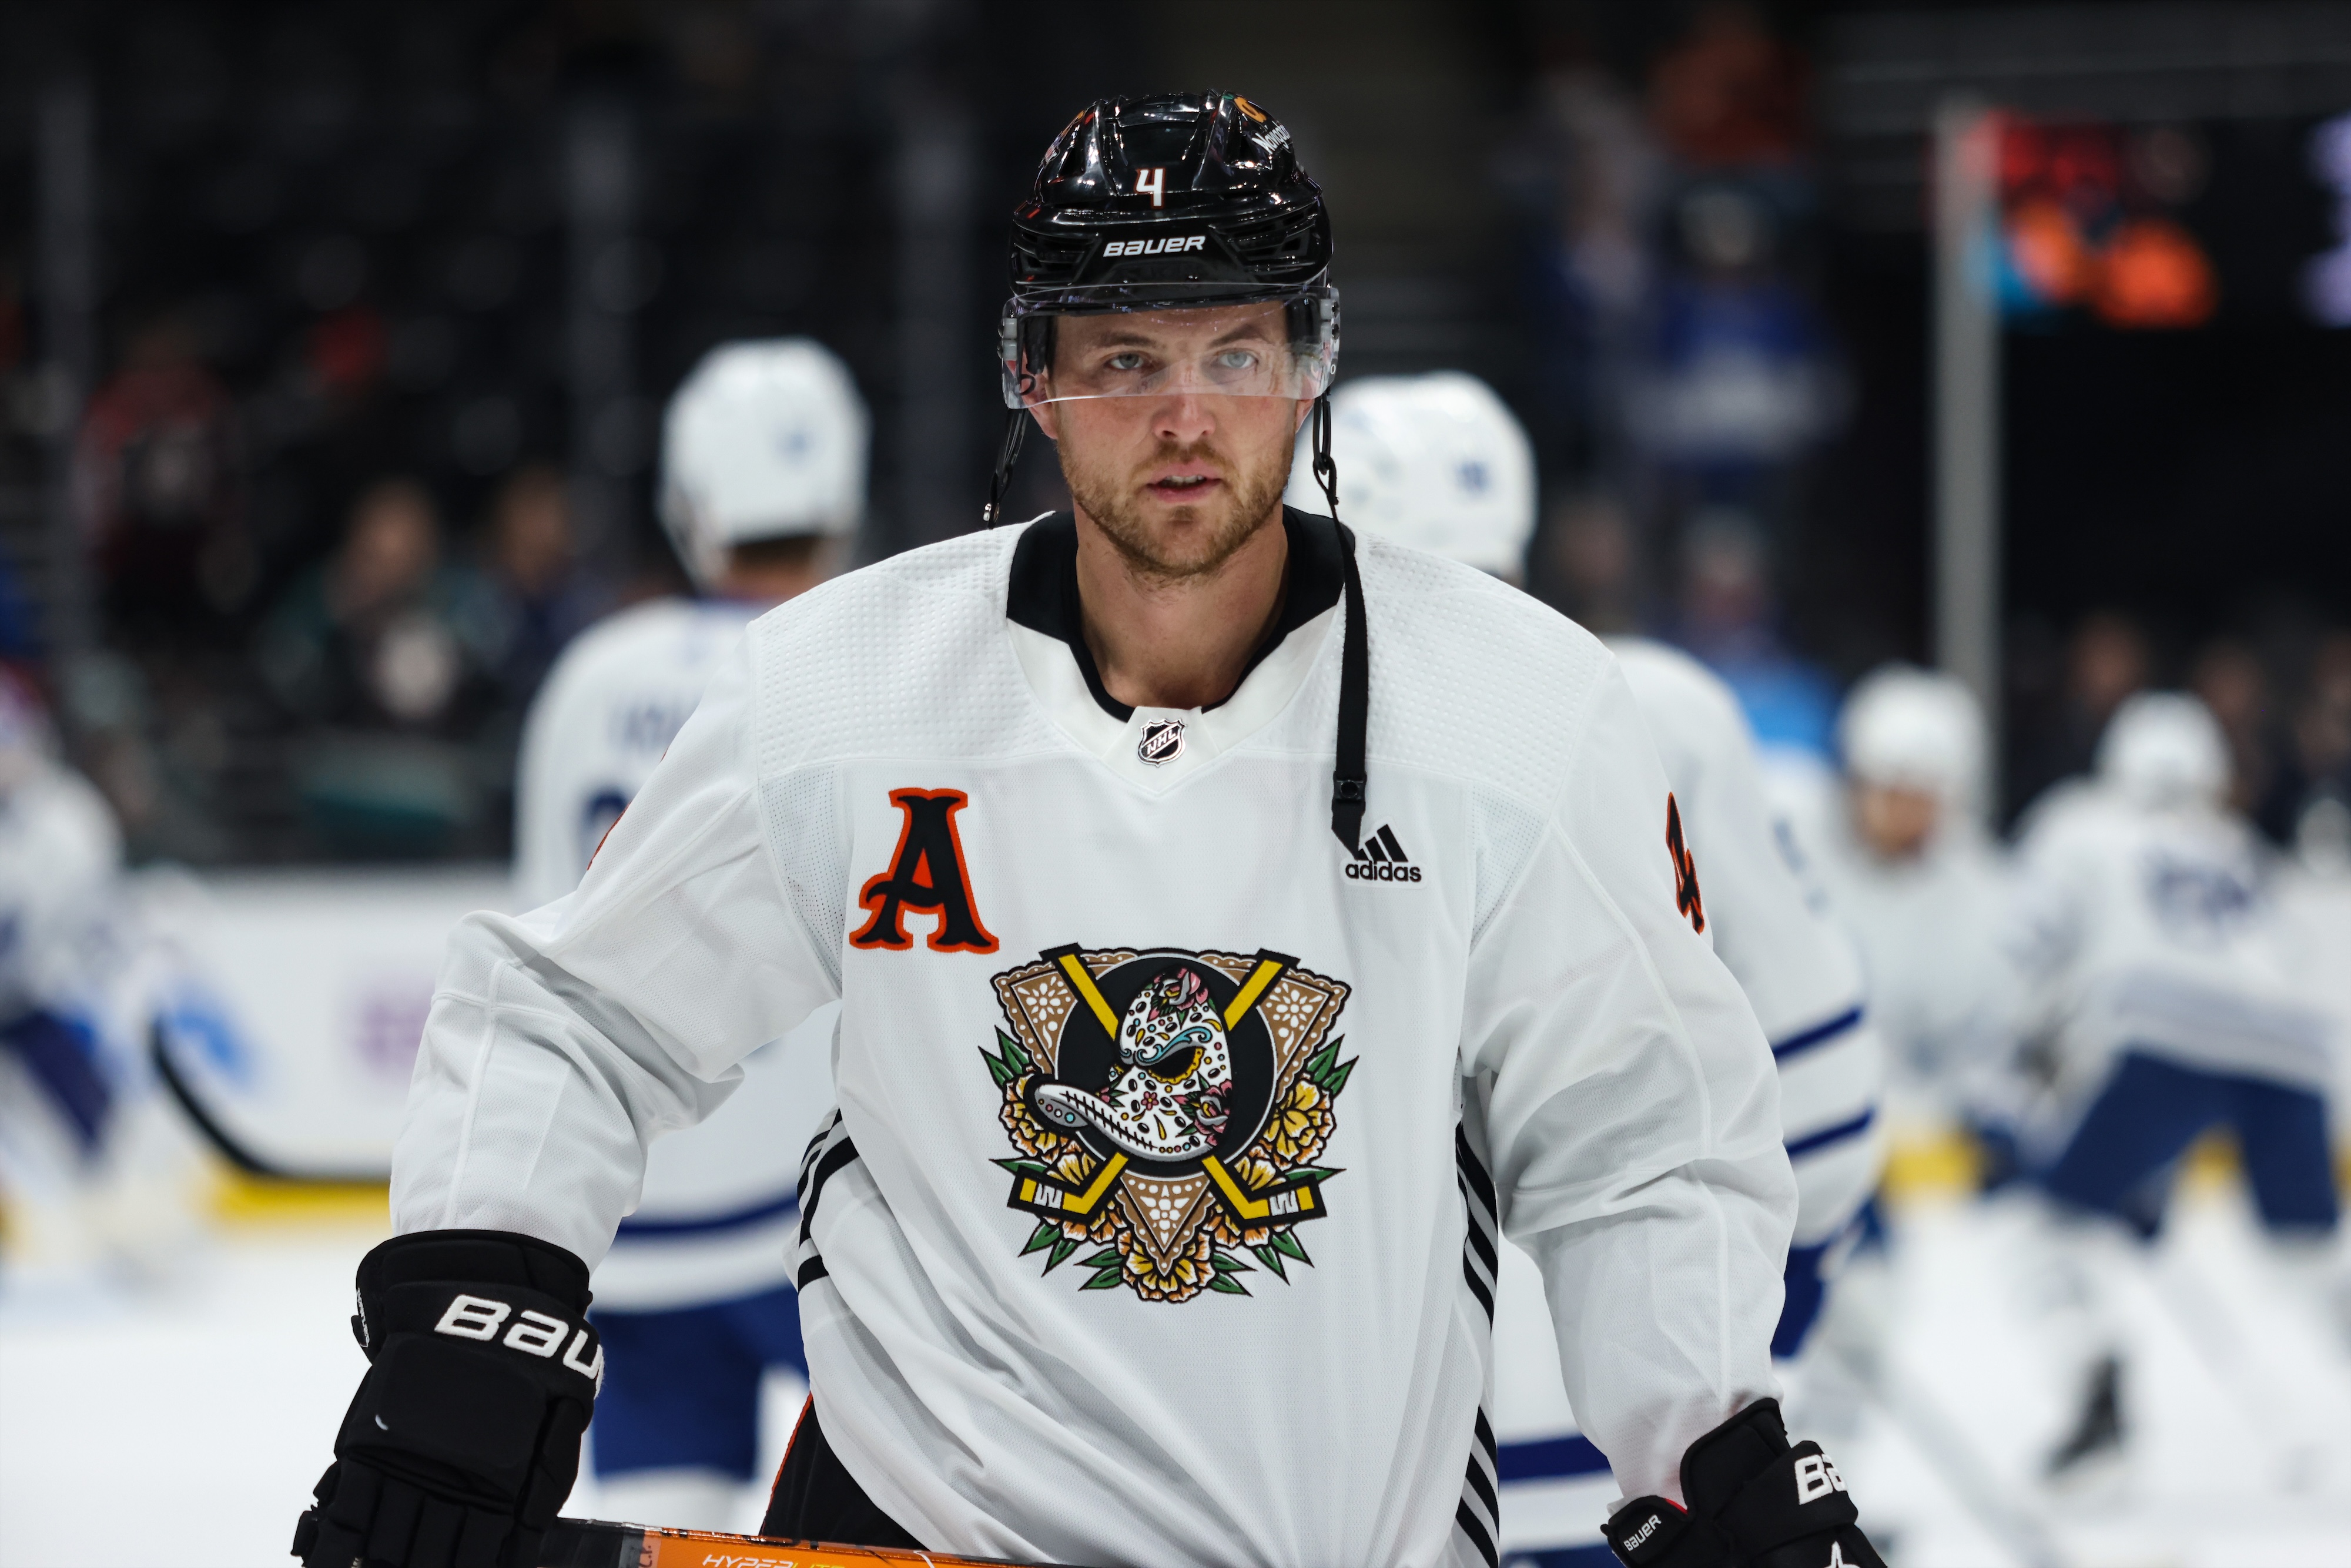 NHL on X: These @AnaheimDucks Día de Muertos warmup jerseys are something  else. 😍 They were designed by Anaheim-based artist Gustavo Jaimes  (@Gusj714) whose creation features the club's original logo combined with